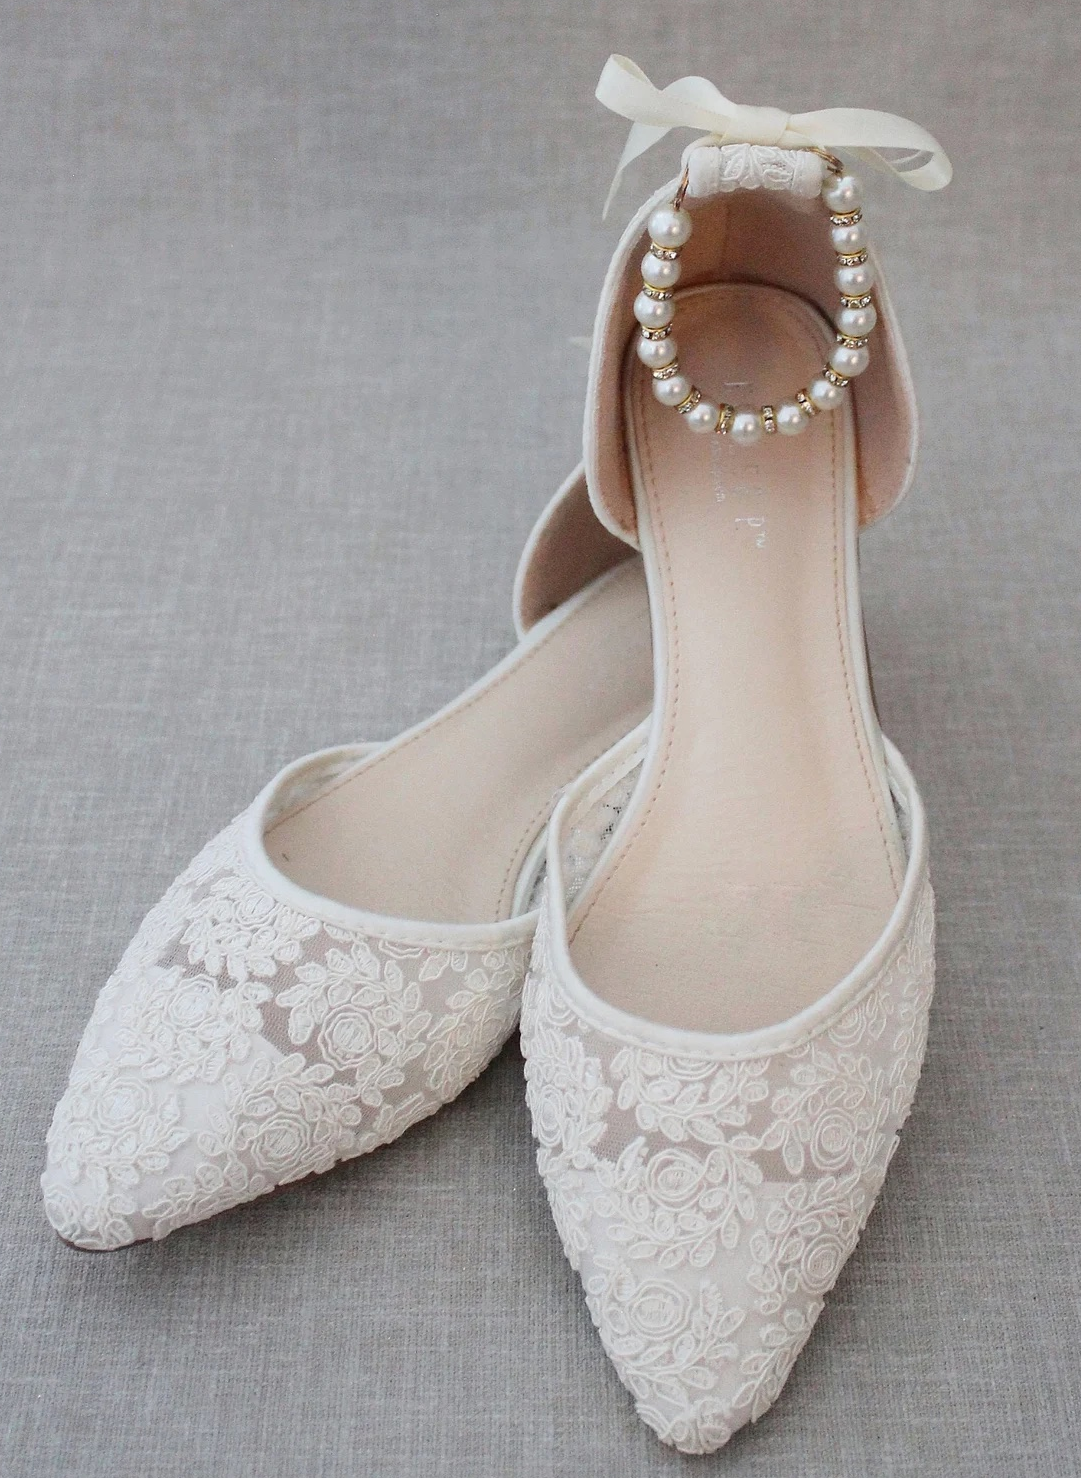 28 Comfortable Wedding Shoes You Can Actually Dance In